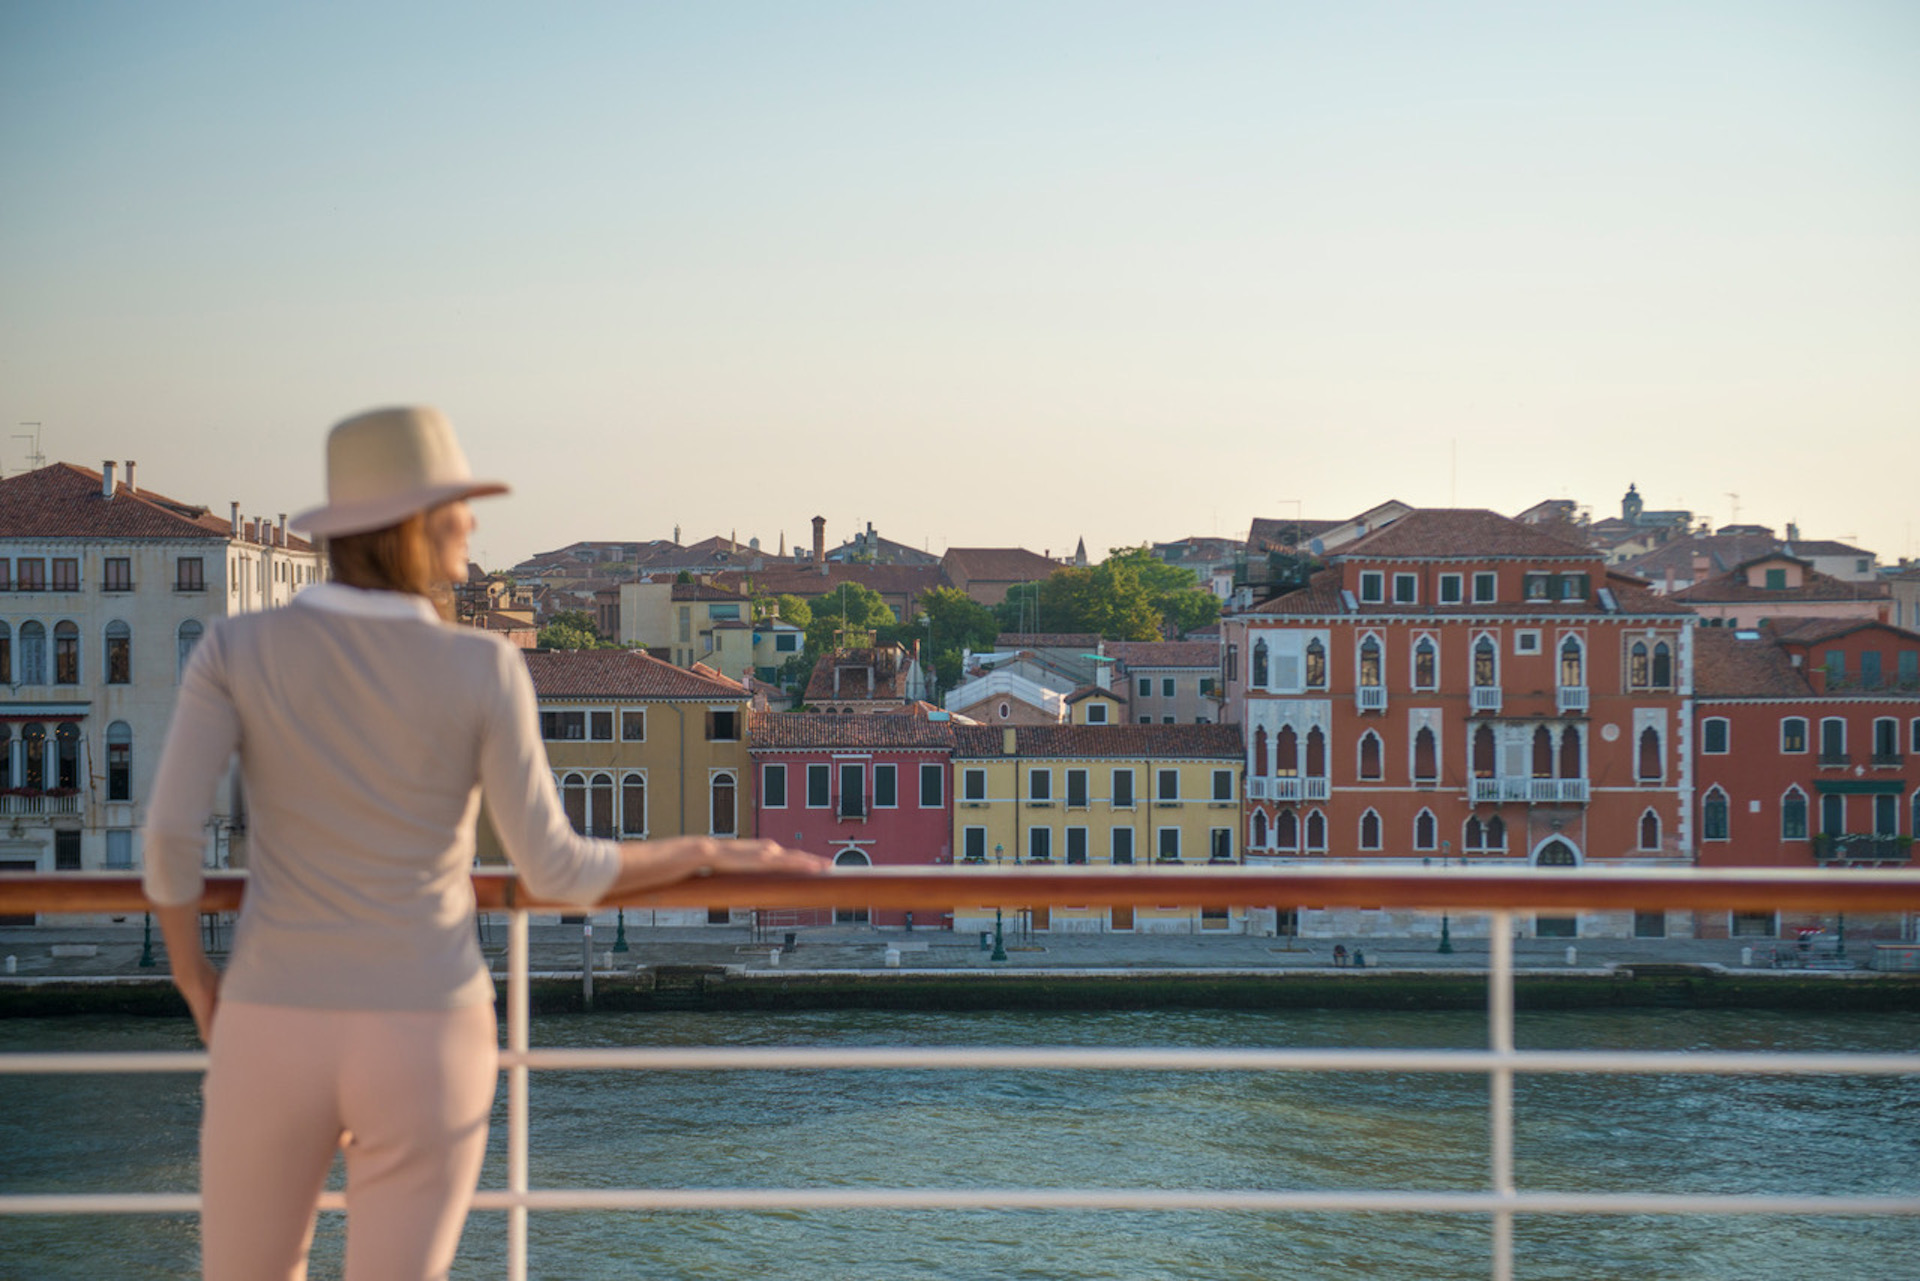 Want to cruise solo? Ponant has an extensive range of itineraries across over 110 small-ship voyages and is charging no single supplements!